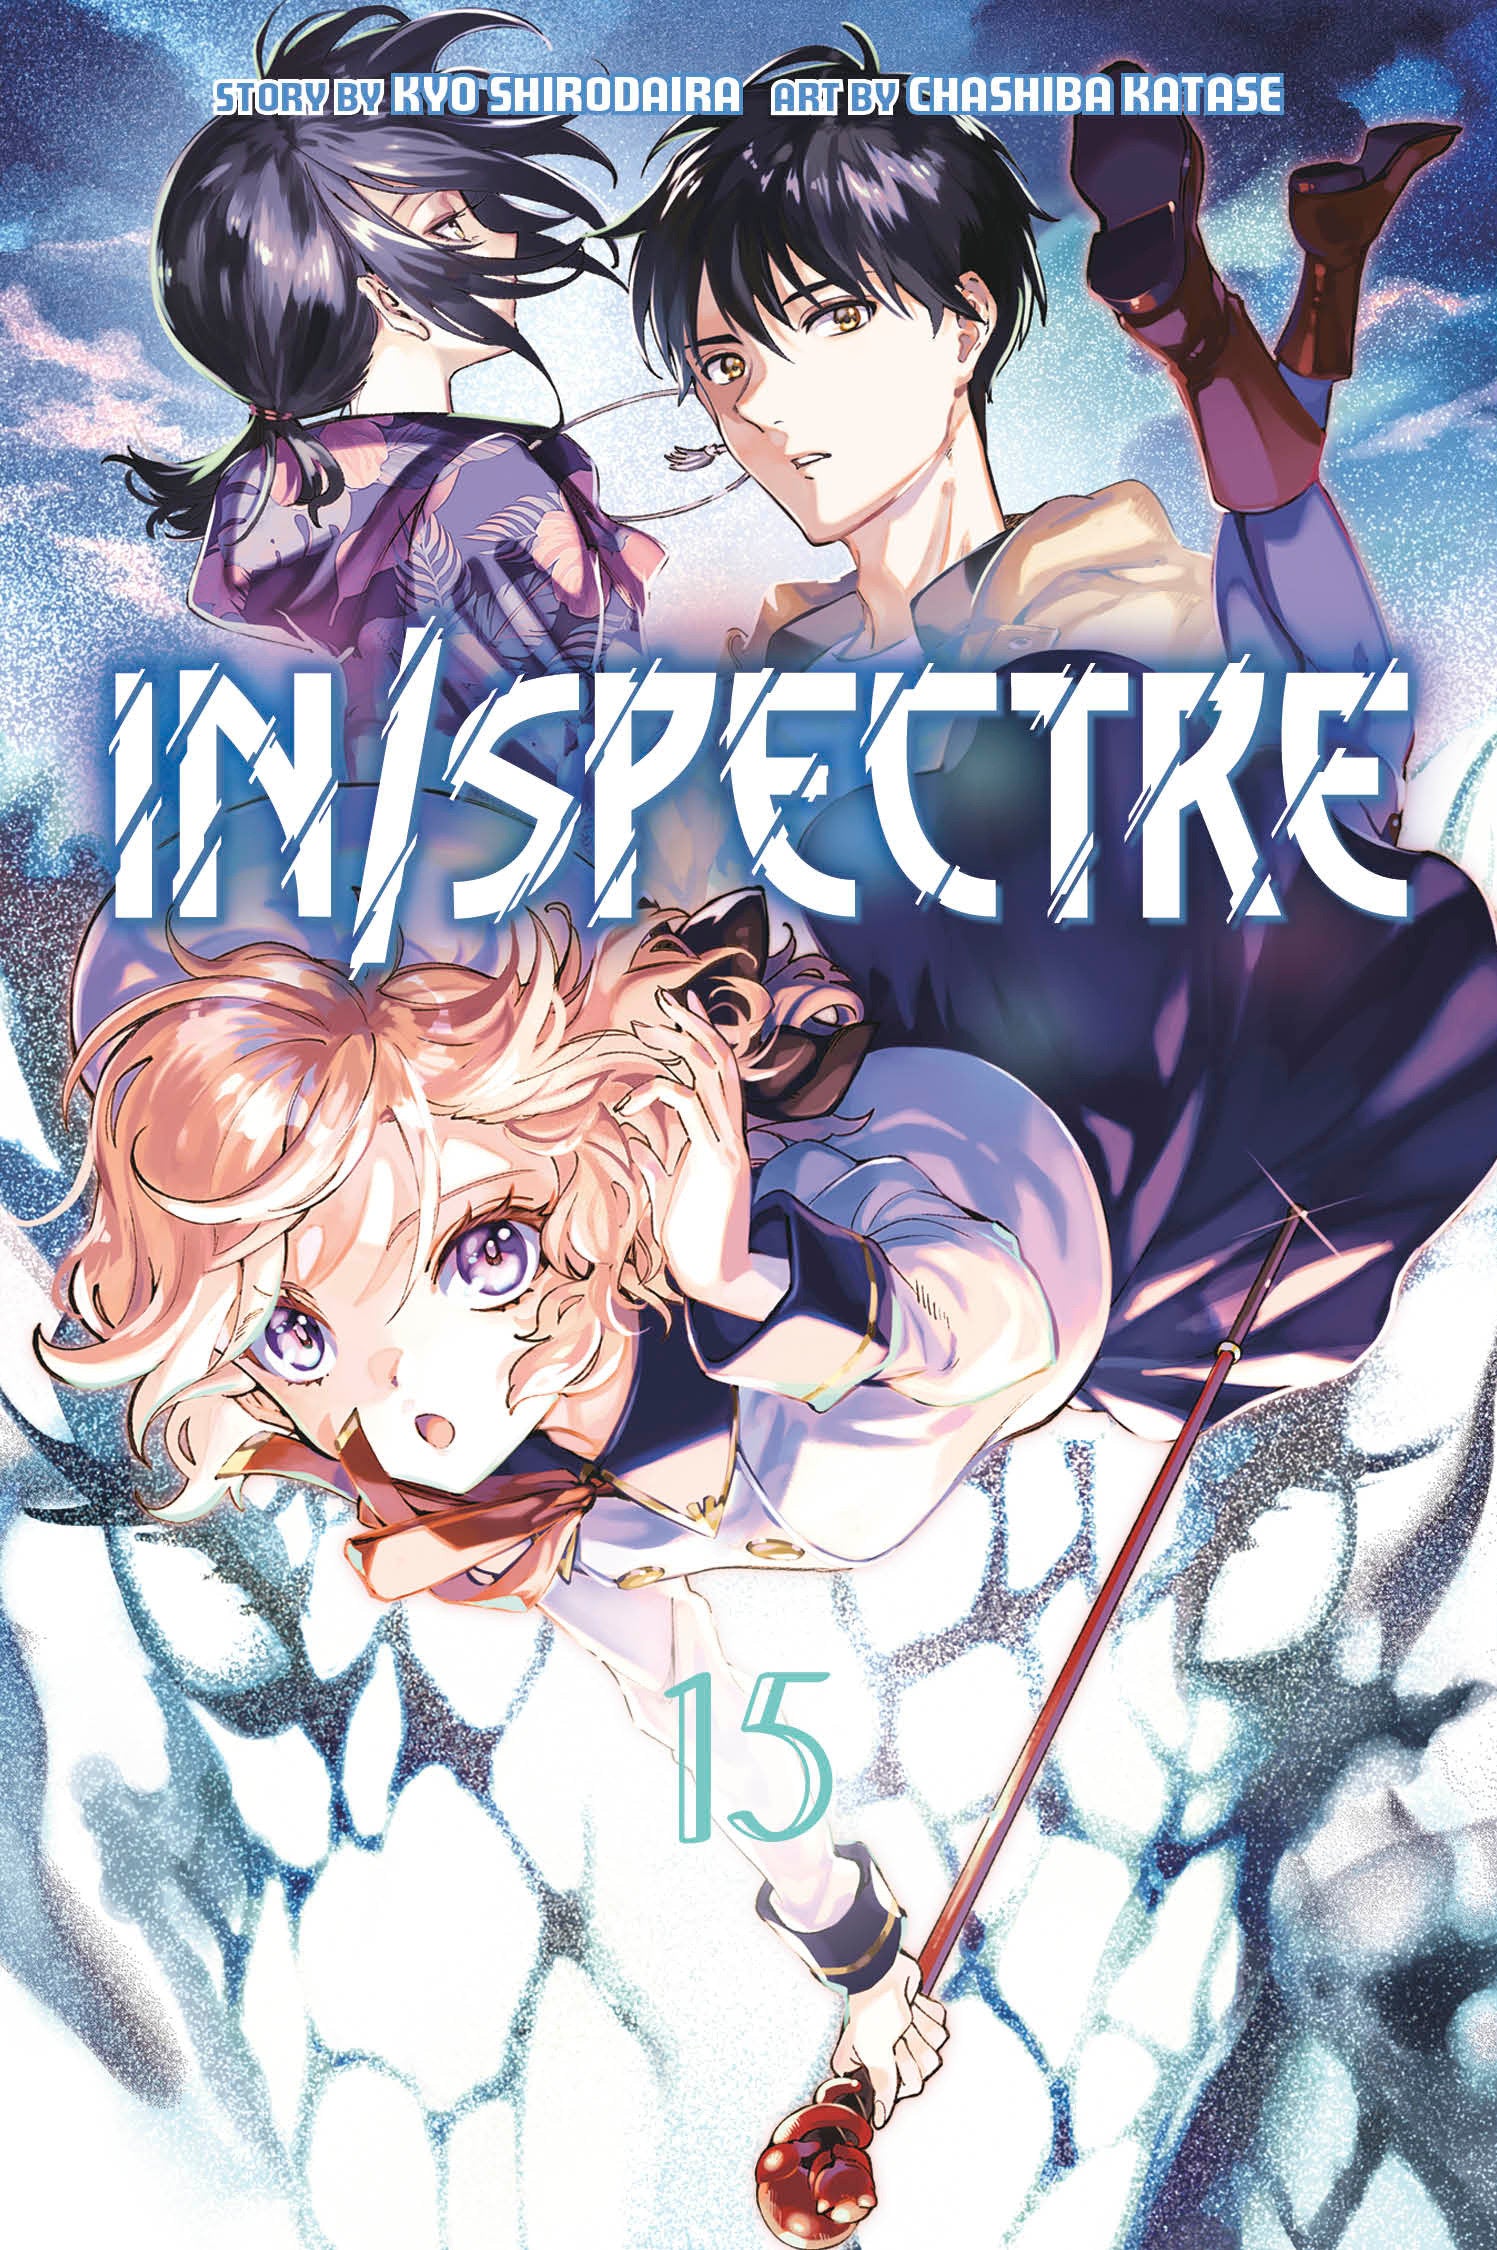 In/Spectre 15 | L.A. Mood Comics and Games